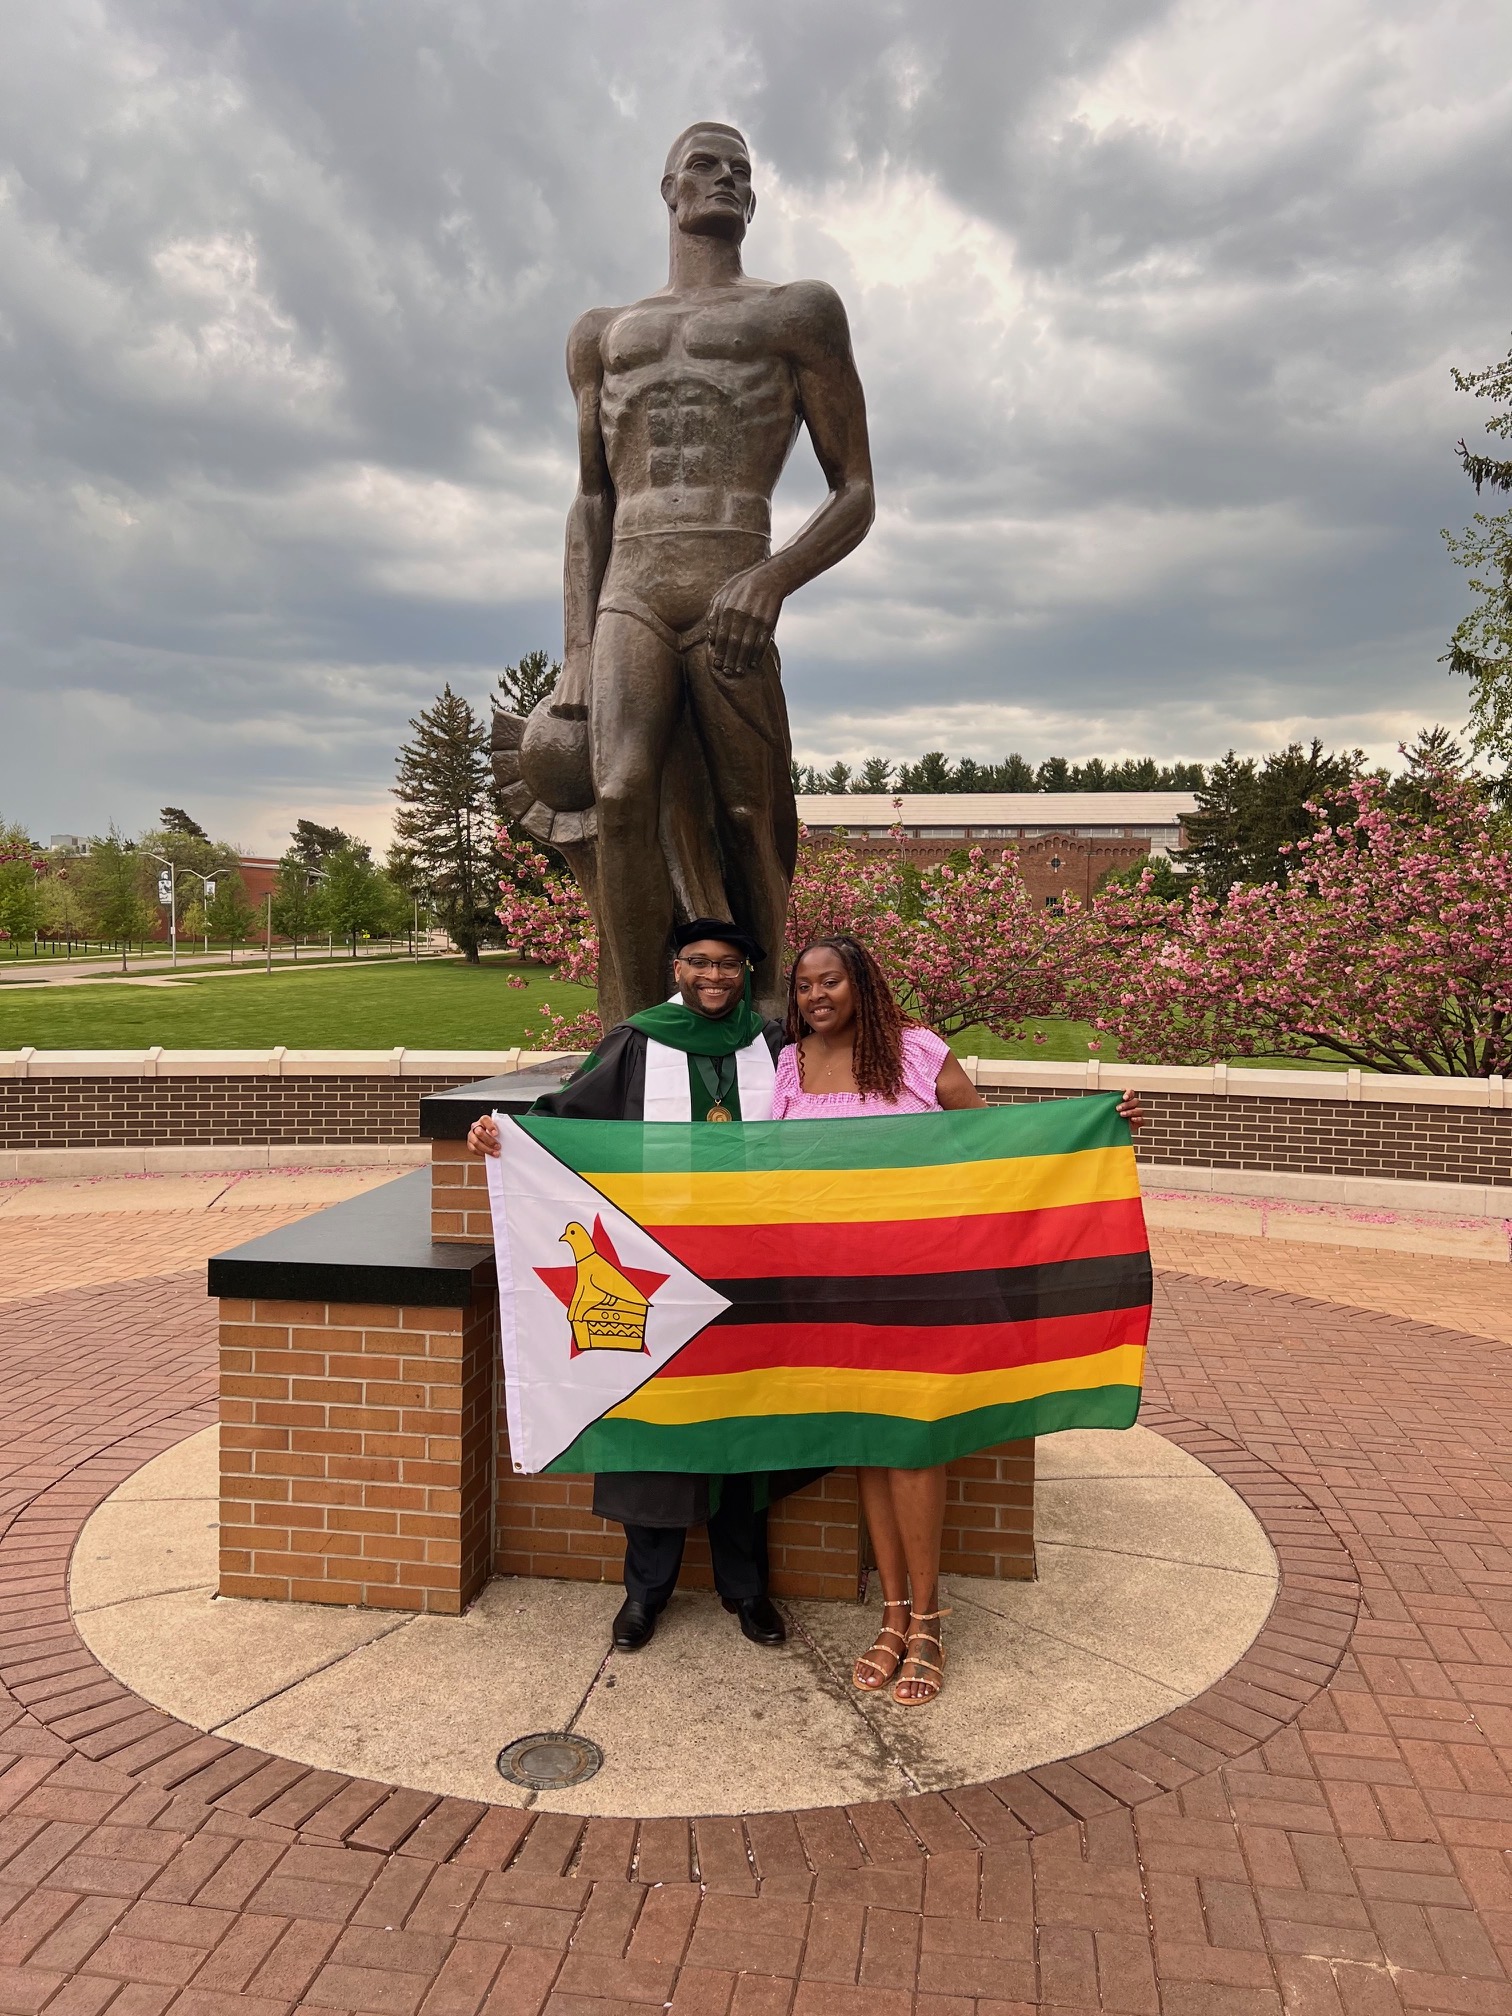 Michael Nyika Andrew poses in front of The Spartan statue with his sister, as they both hold the flag of Zimbabwe